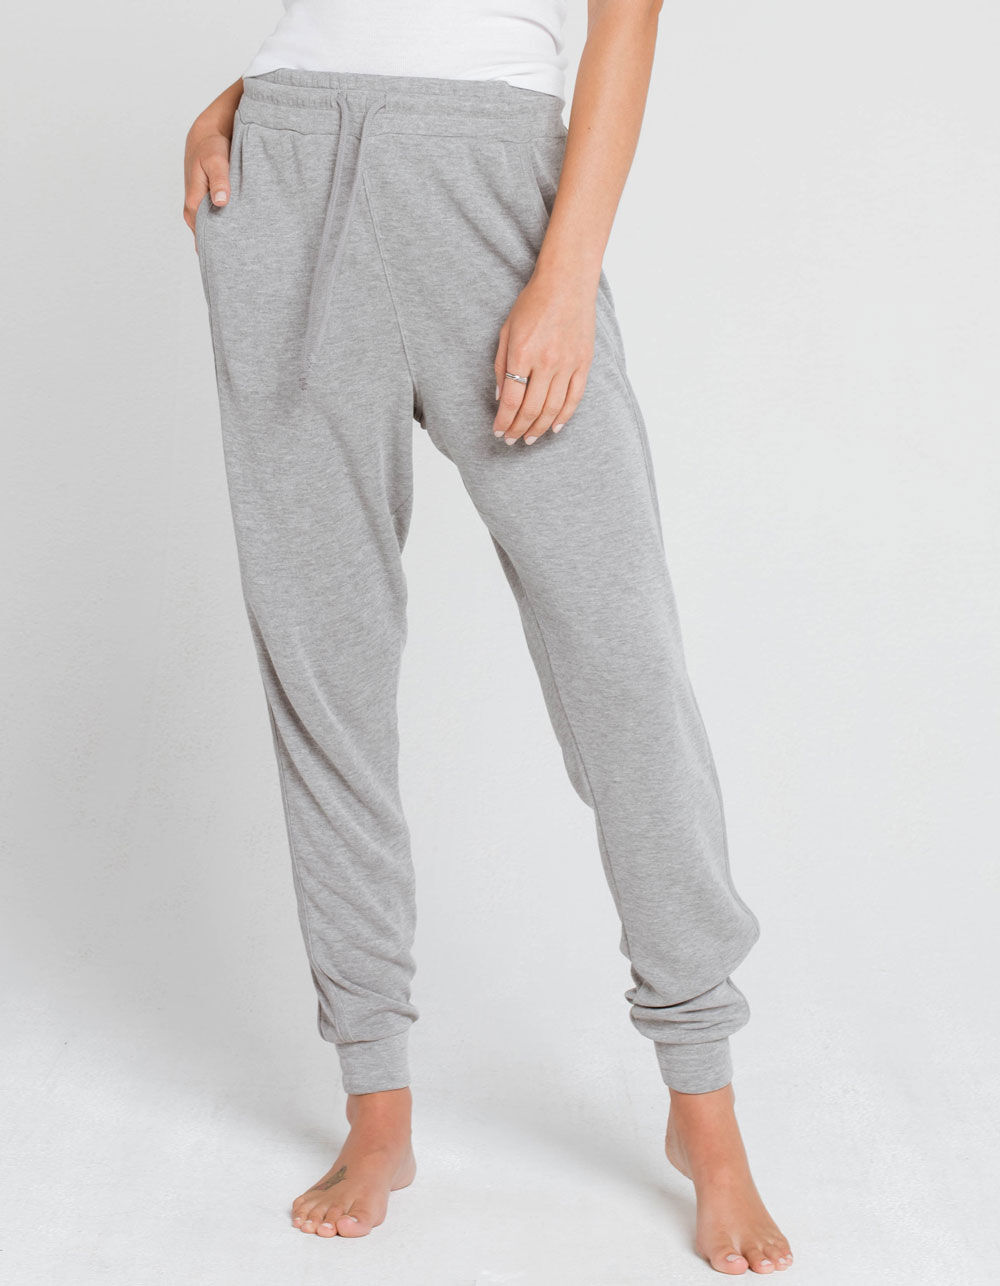 FREE PEOPLE Back Into It Womens Gray Jogger Sweatpants - GRAY | Tillys